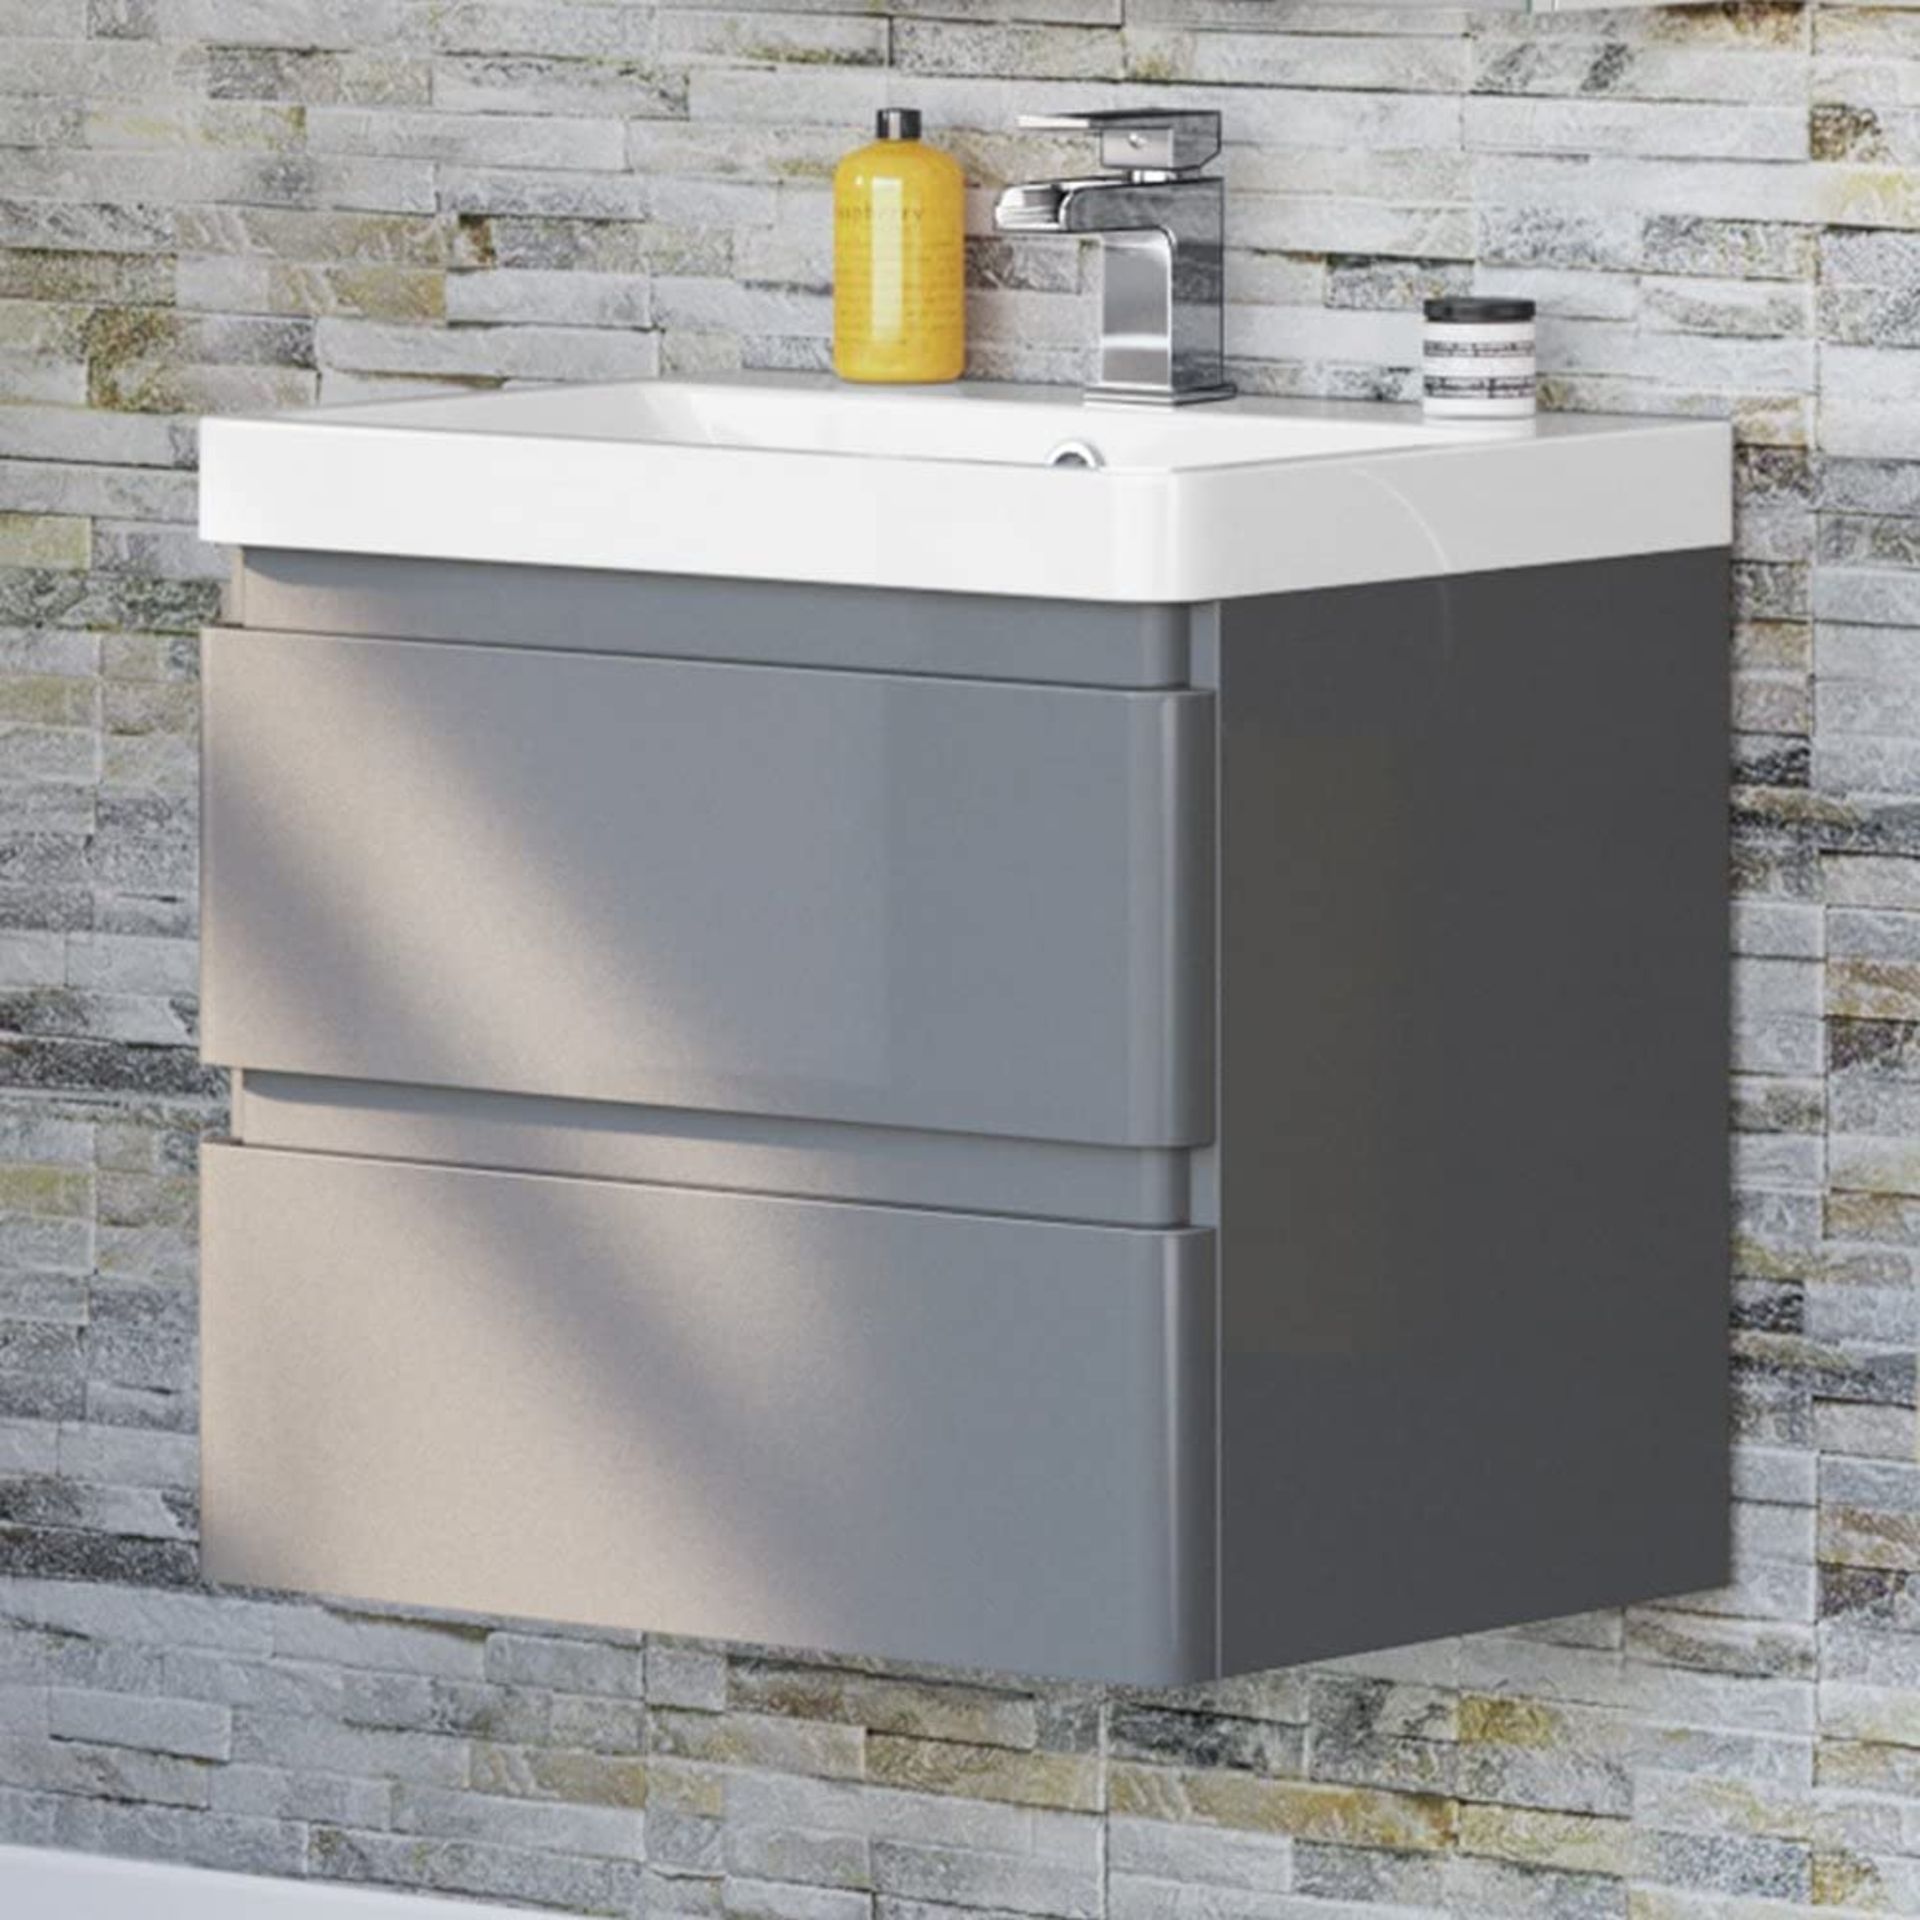 New & Boxed 600mm Denver II Grey Built In Basin Drawer Unit - Wall Hung. RRP £849.99 Mf2402.W...